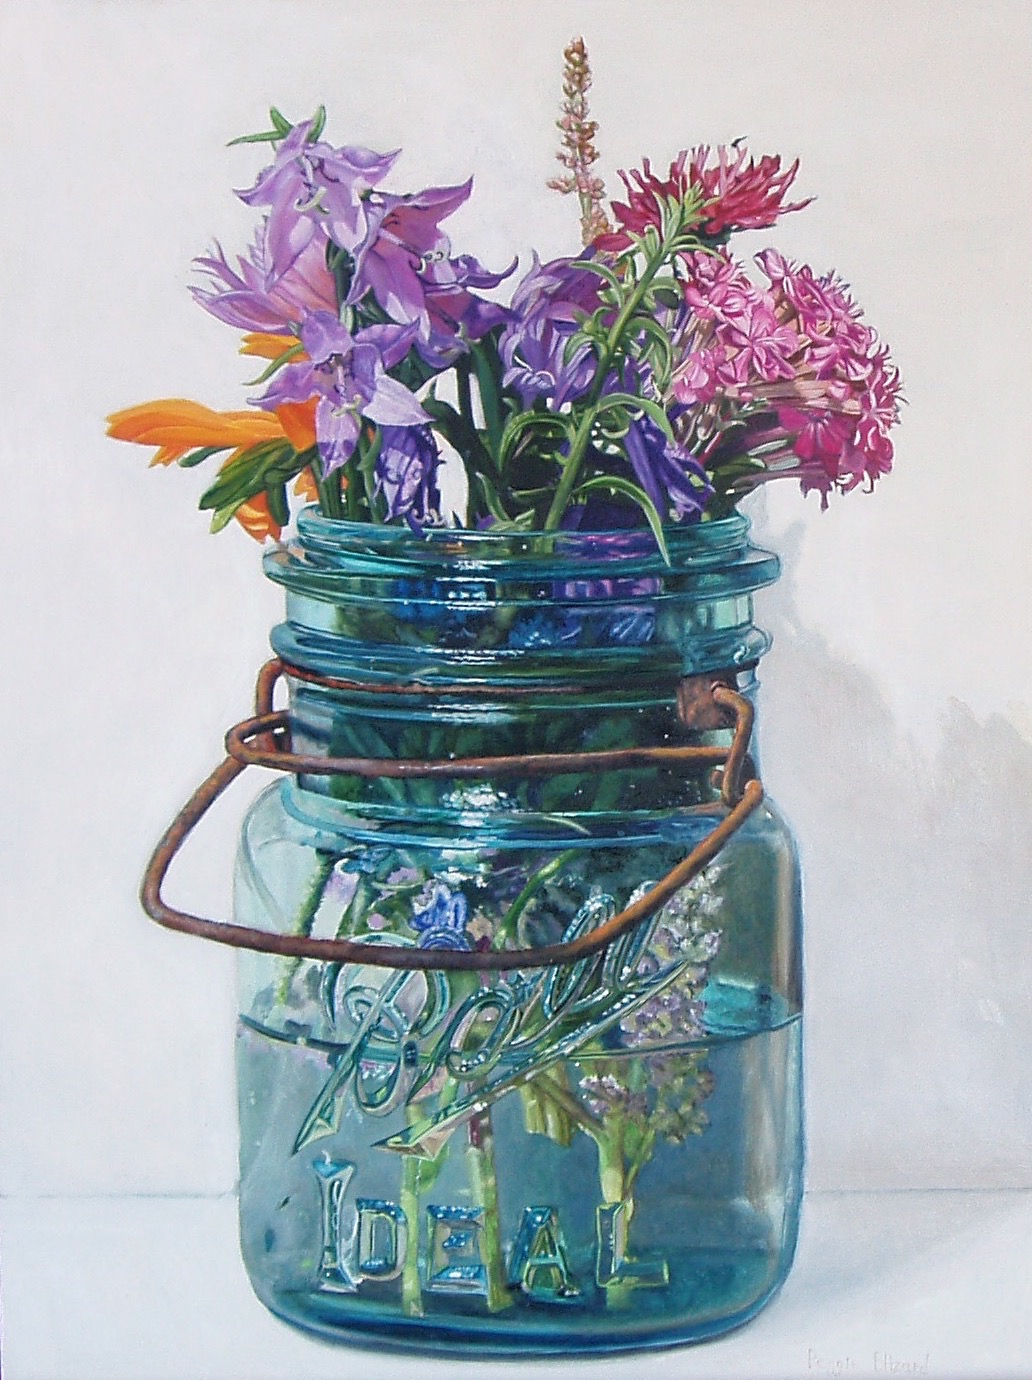 Peggie Blizard, Summer Flowers with Lavender Bells,oil on panel, 24x18", $4,400